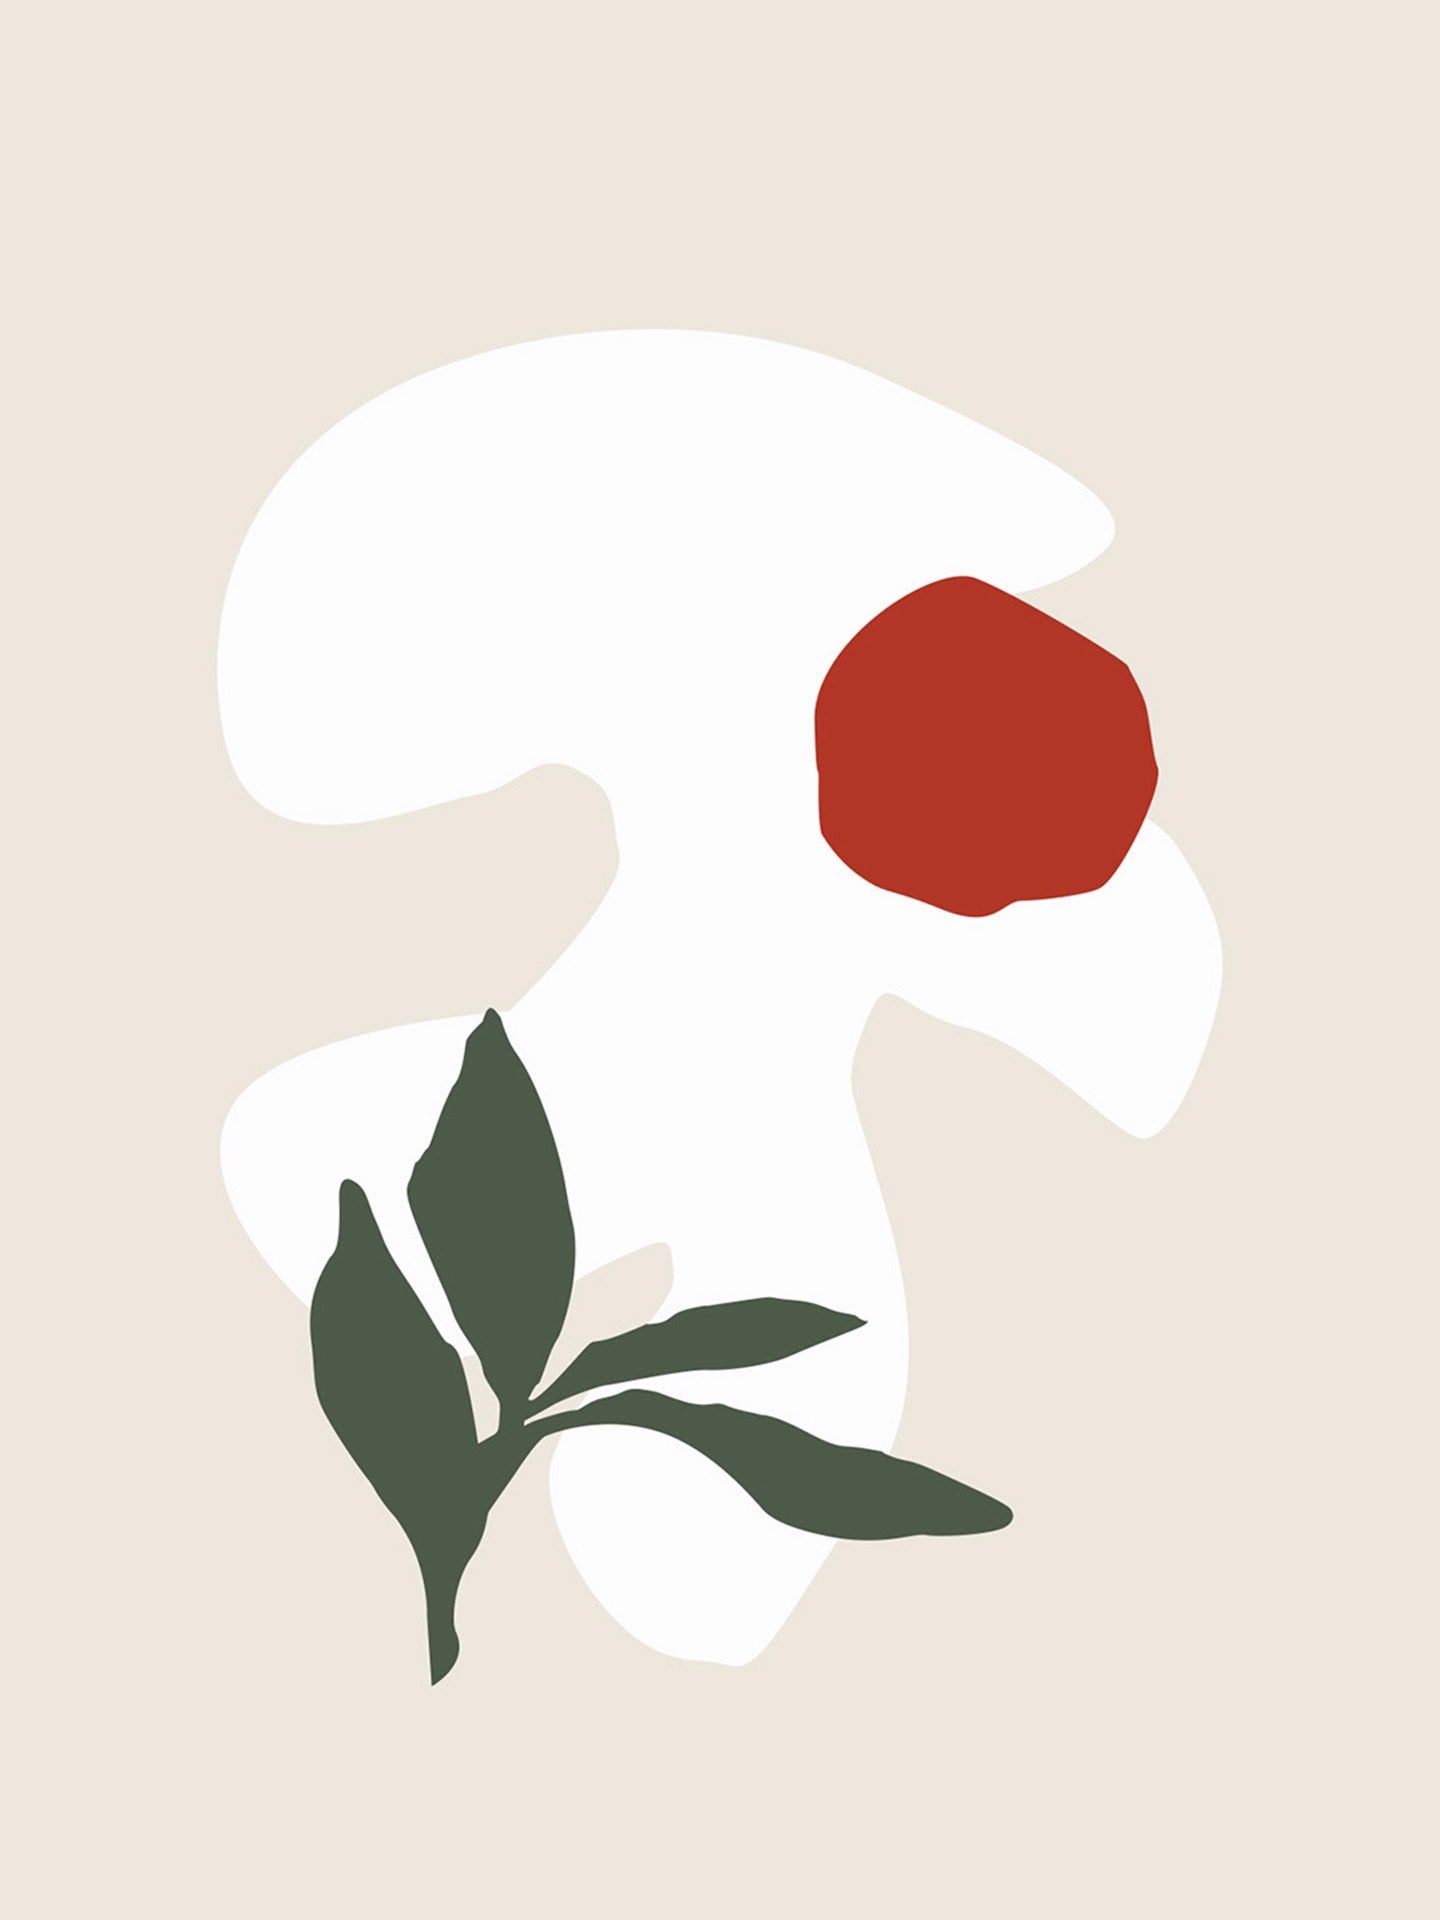 A white flower with a red dot on a beige background.